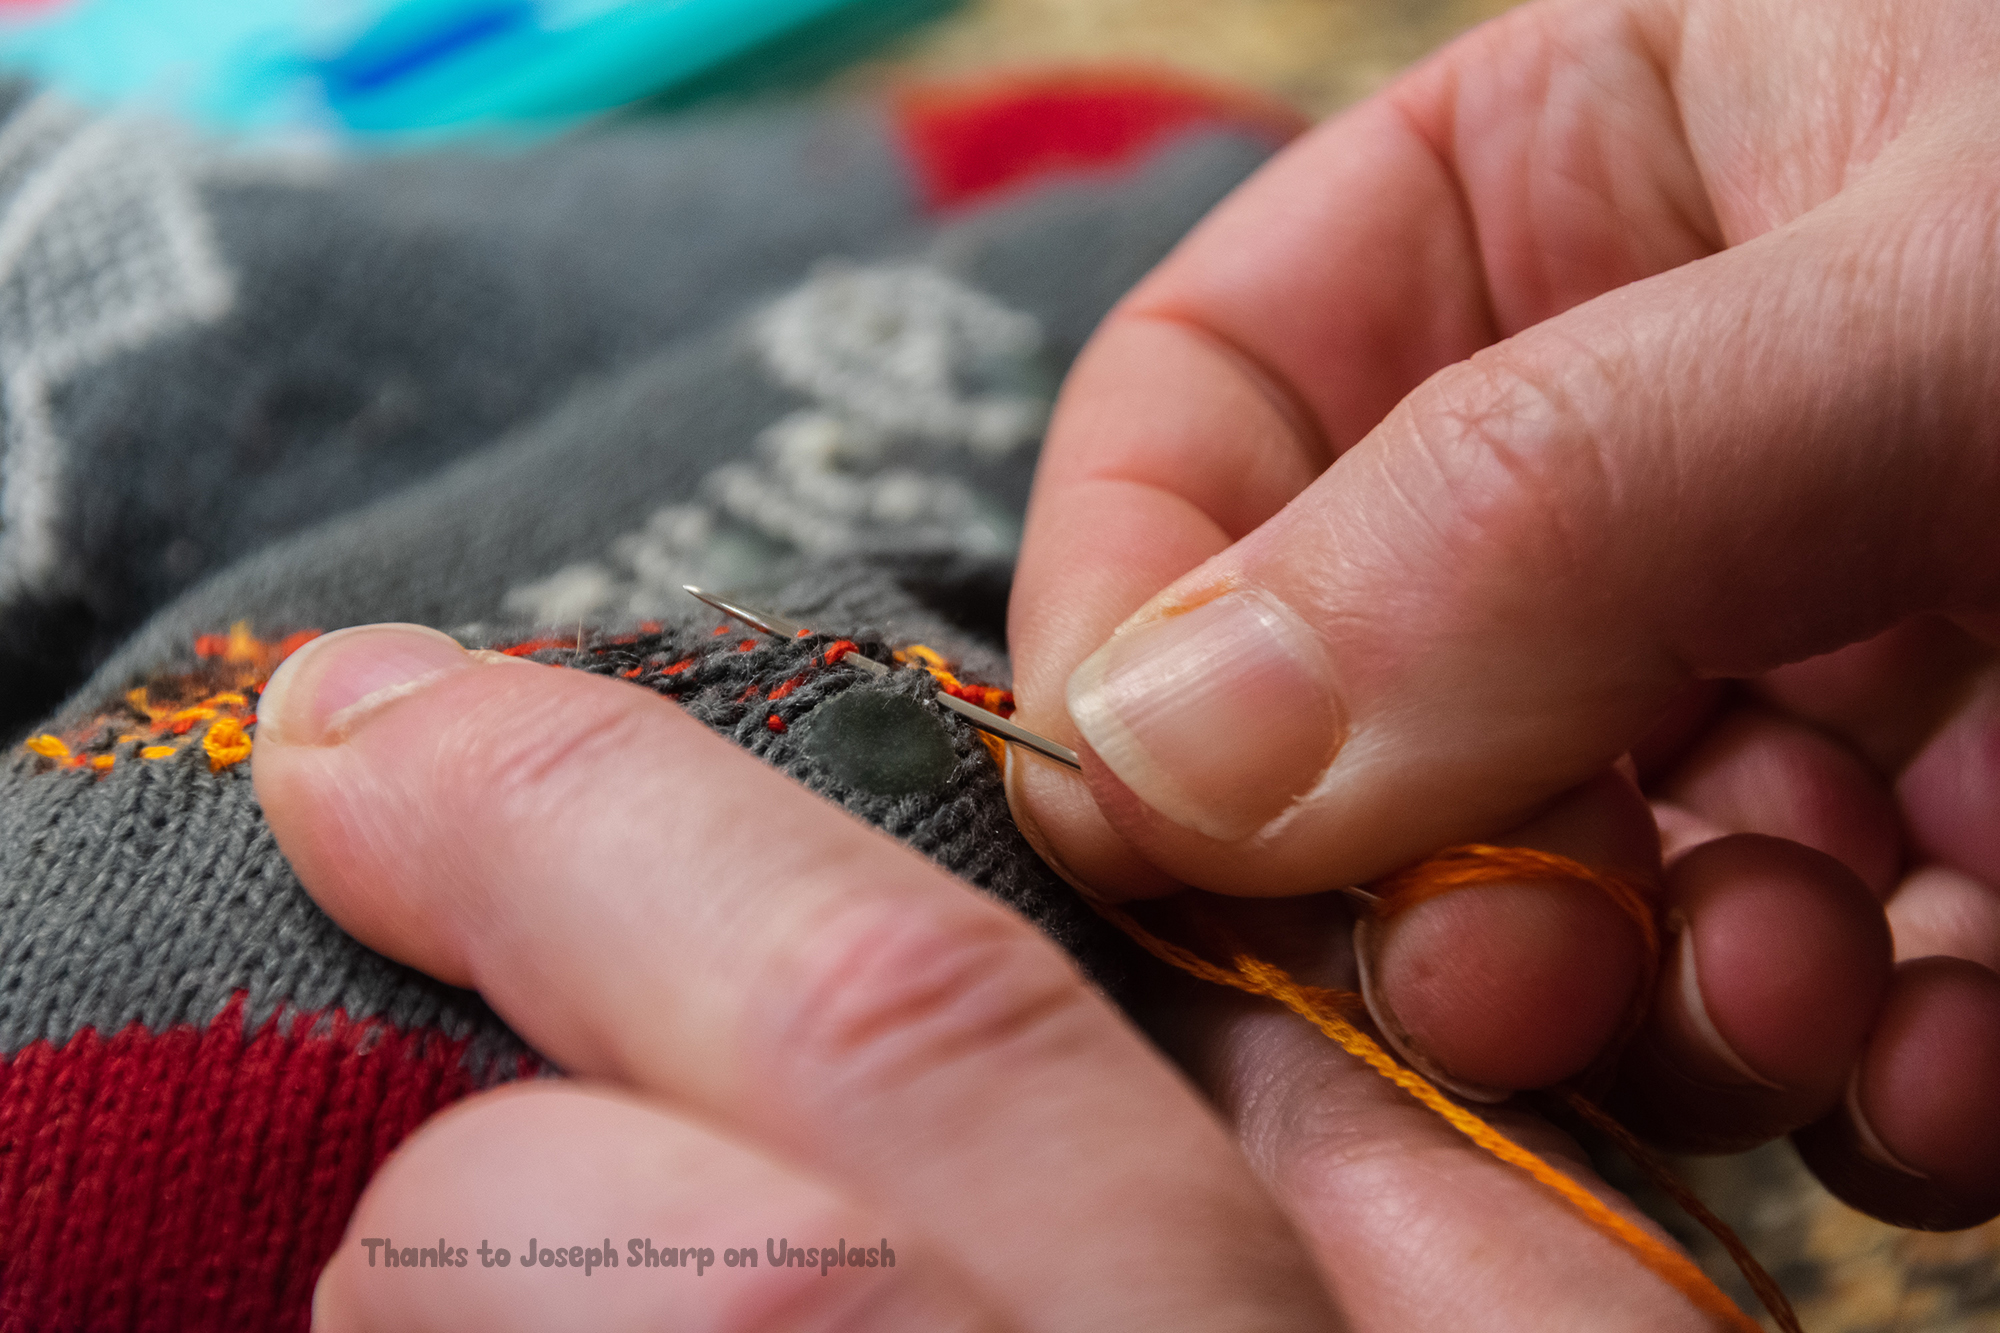 The photoif of a pair of hands mending a jumper with bright orange thread